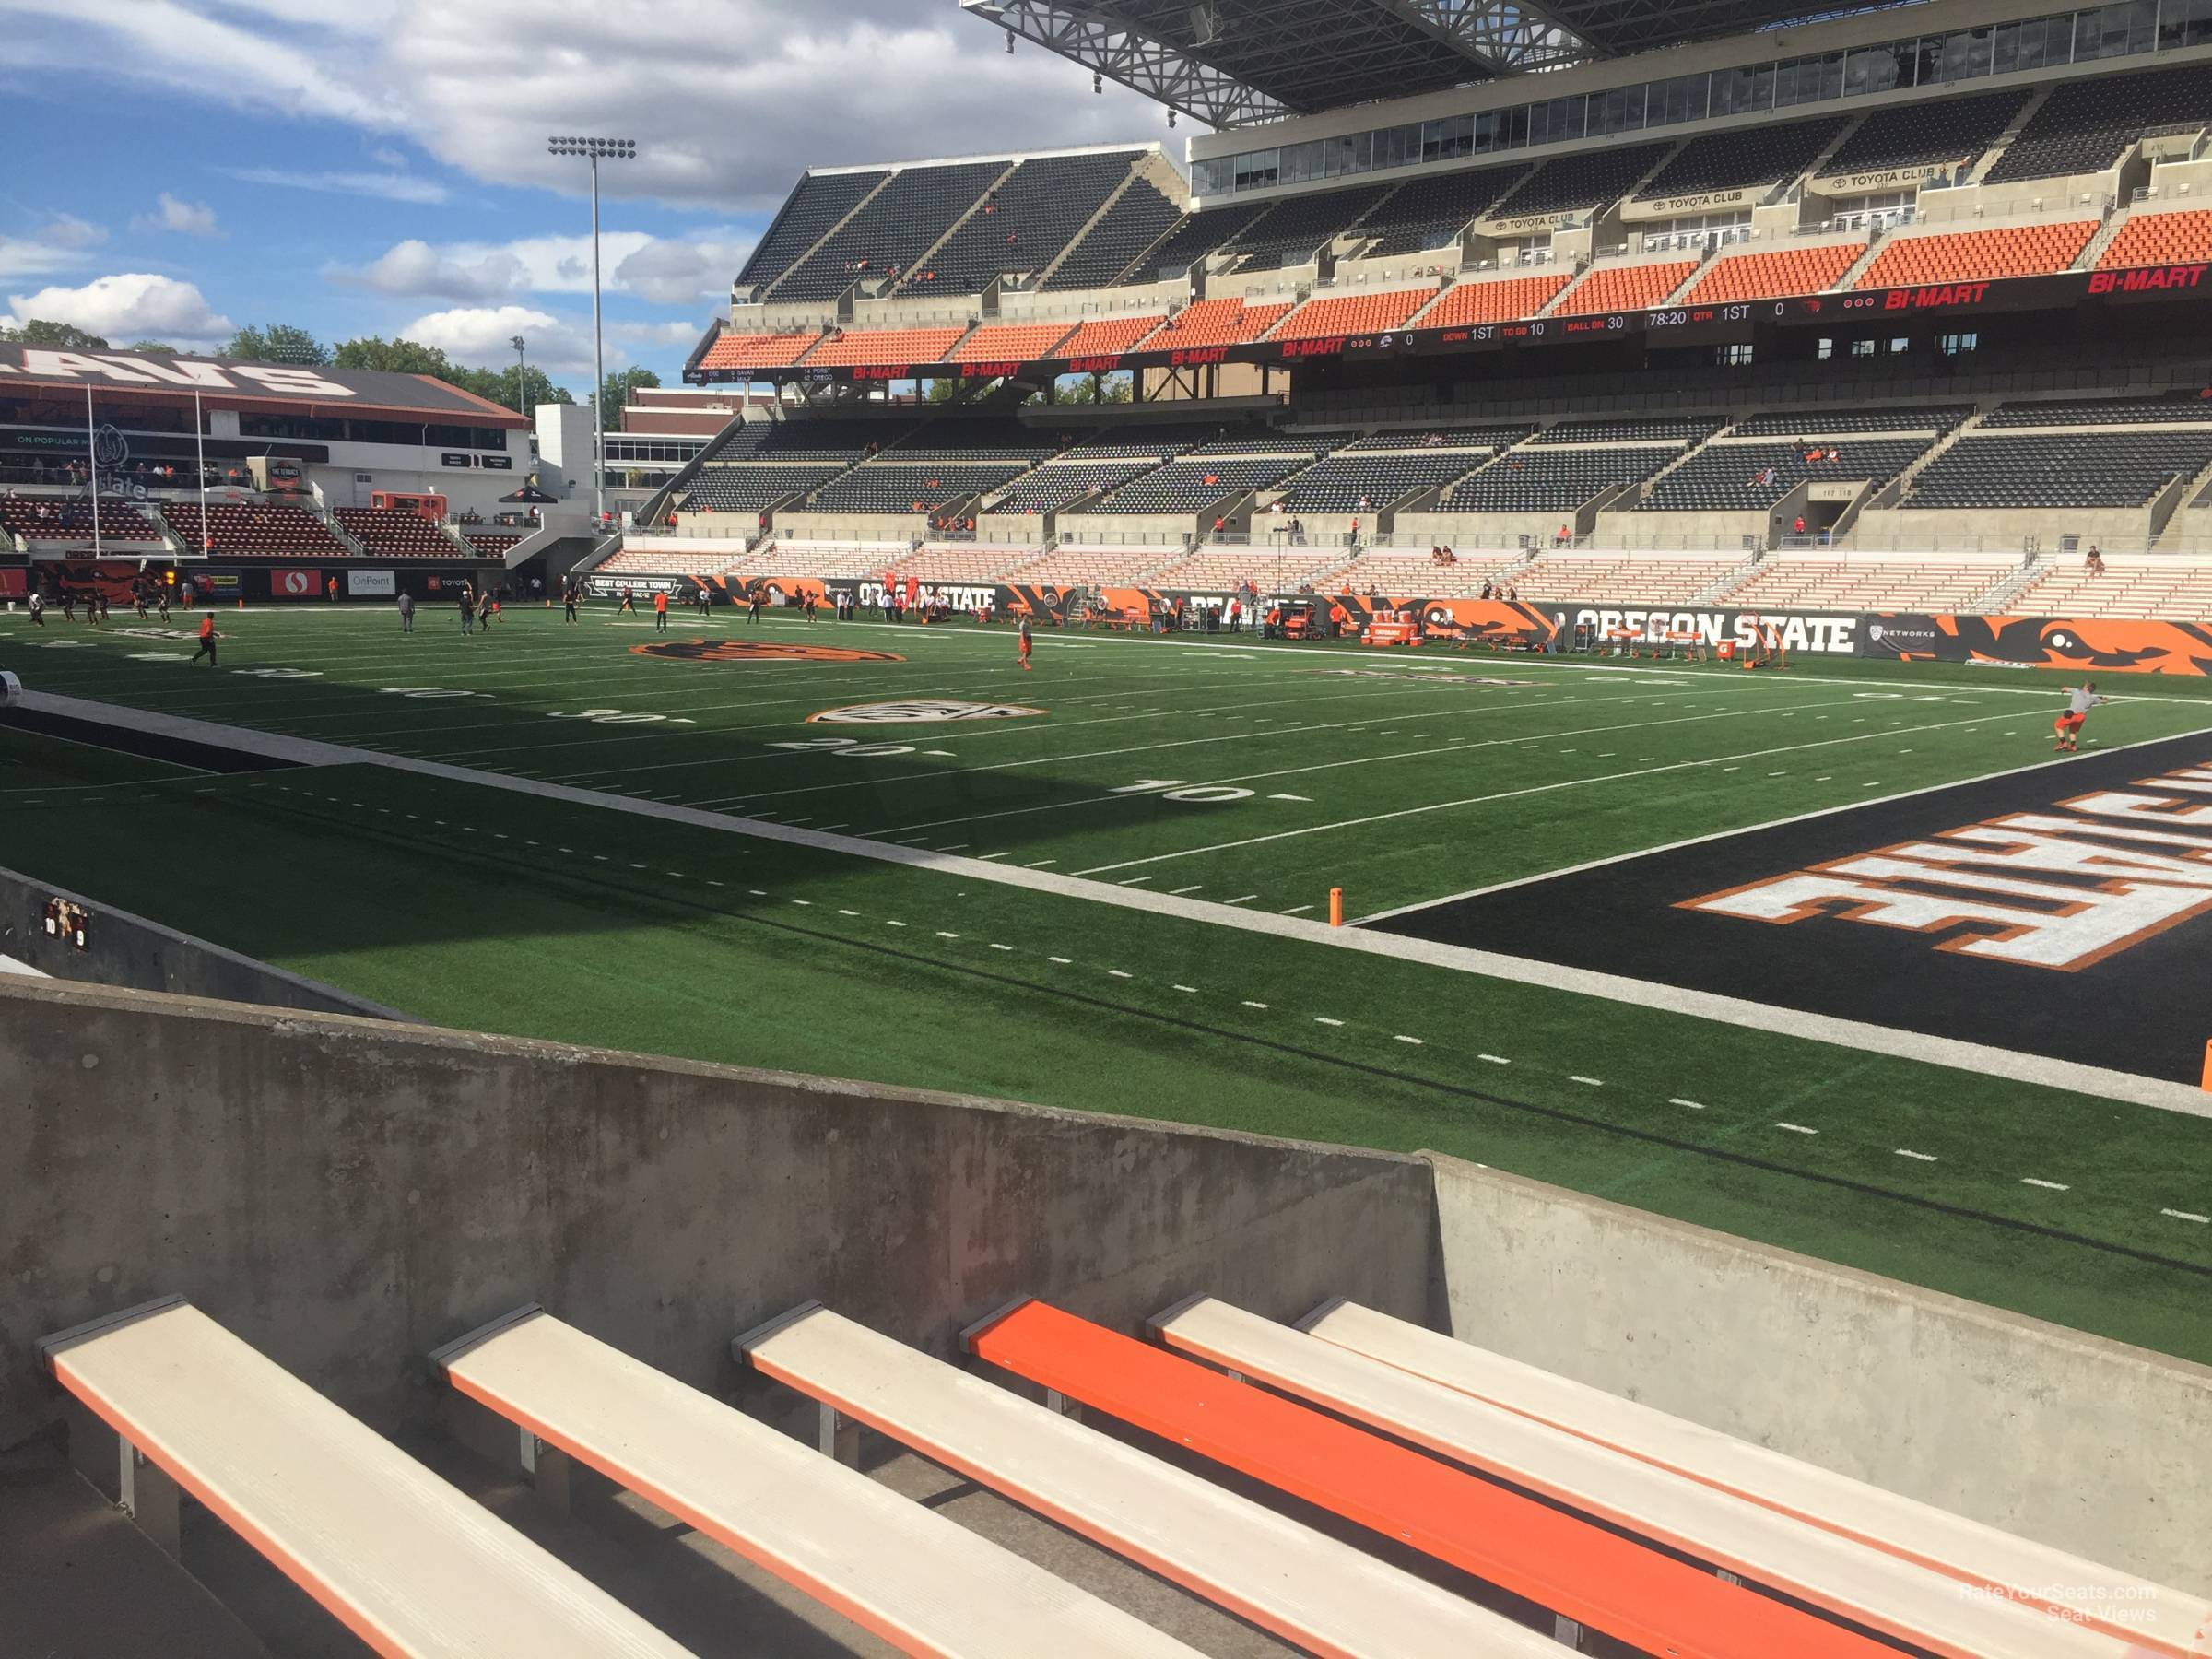 section 127, row 8 seat view  - reser stadium